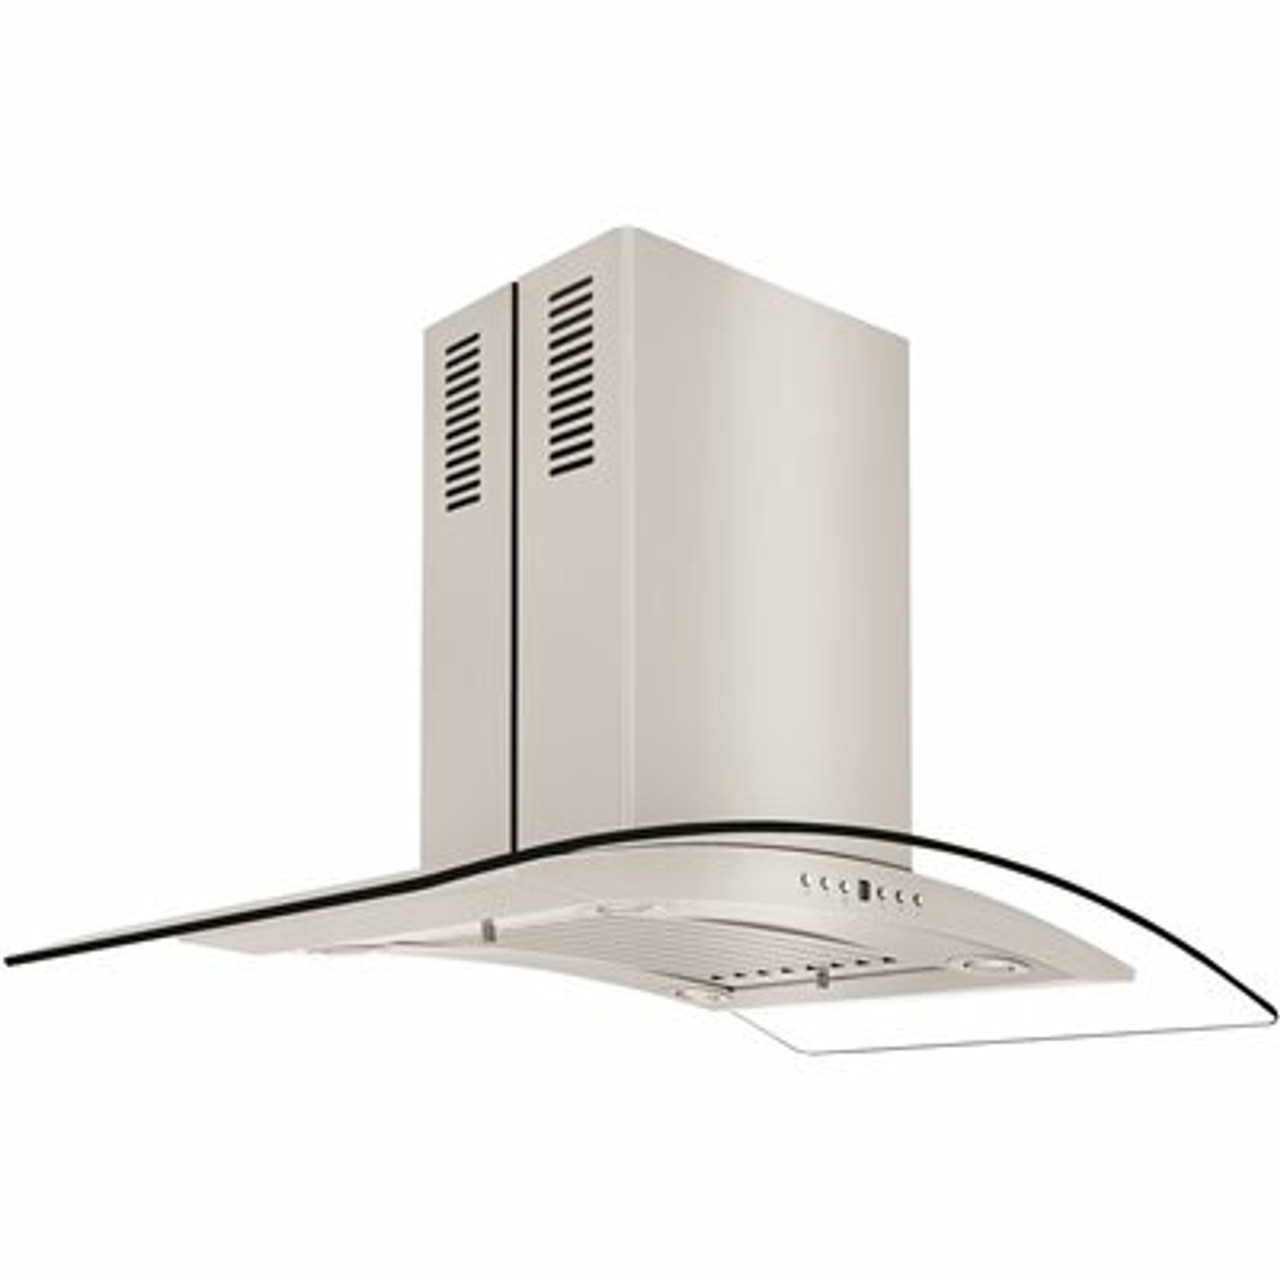 Zline Kitchen And Bath Zline 30 In. Convertible Vent Island Mount Range Hood In Stainless Steel And Glass (Gl14I-30)